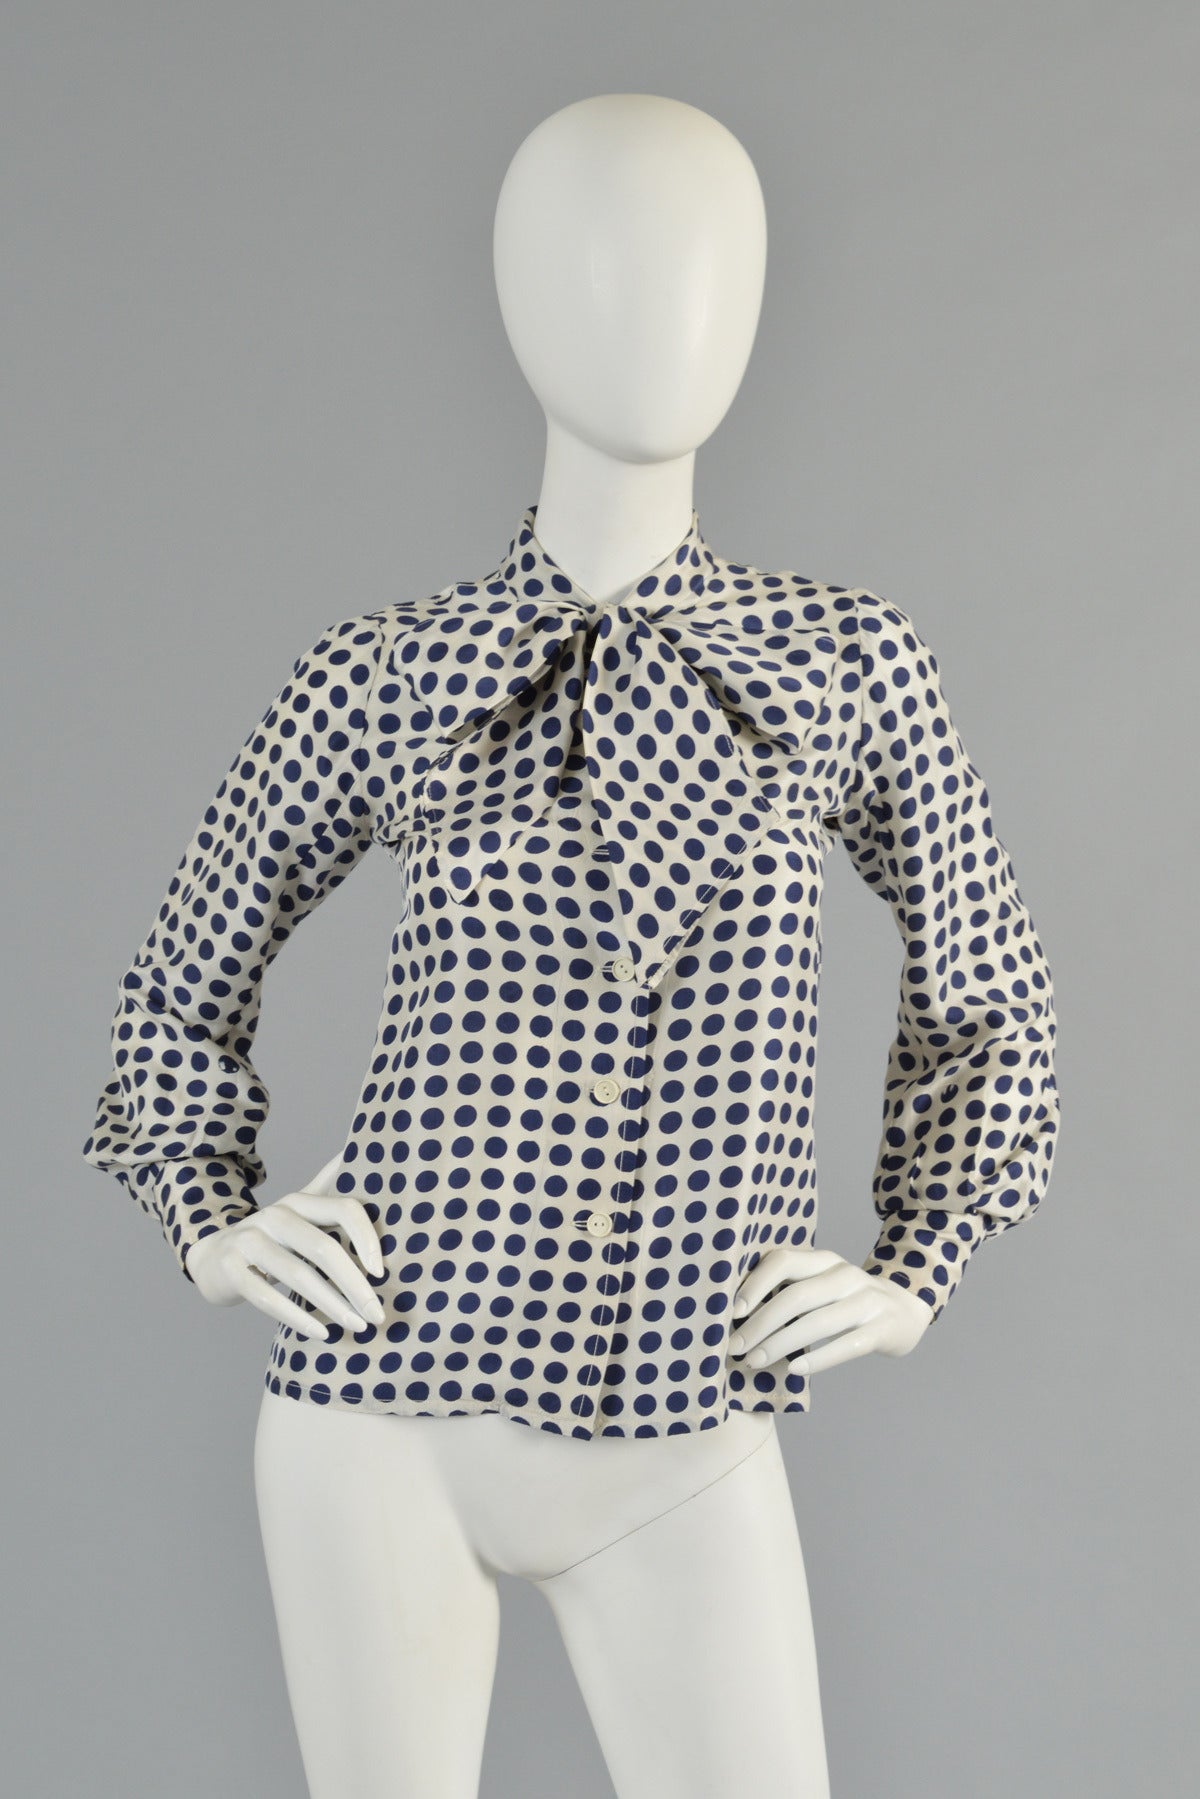 Darling vintage late 60s/early 70s silk blouse by Emanuel Ungaro. White silk body with hand-screened navy blue polkadots. As seen in the next to the last photo, due to the hand-screened nature, some of the polkadots have slight imperfections. Large